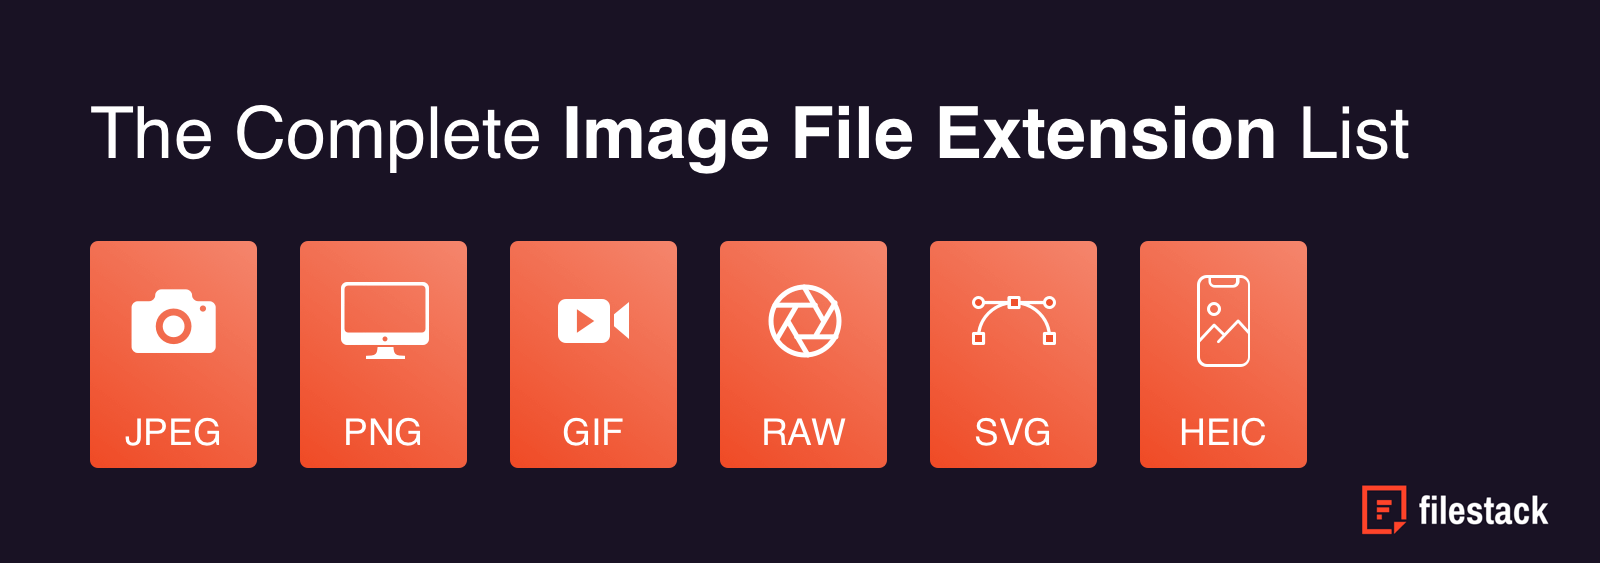 image file extensions